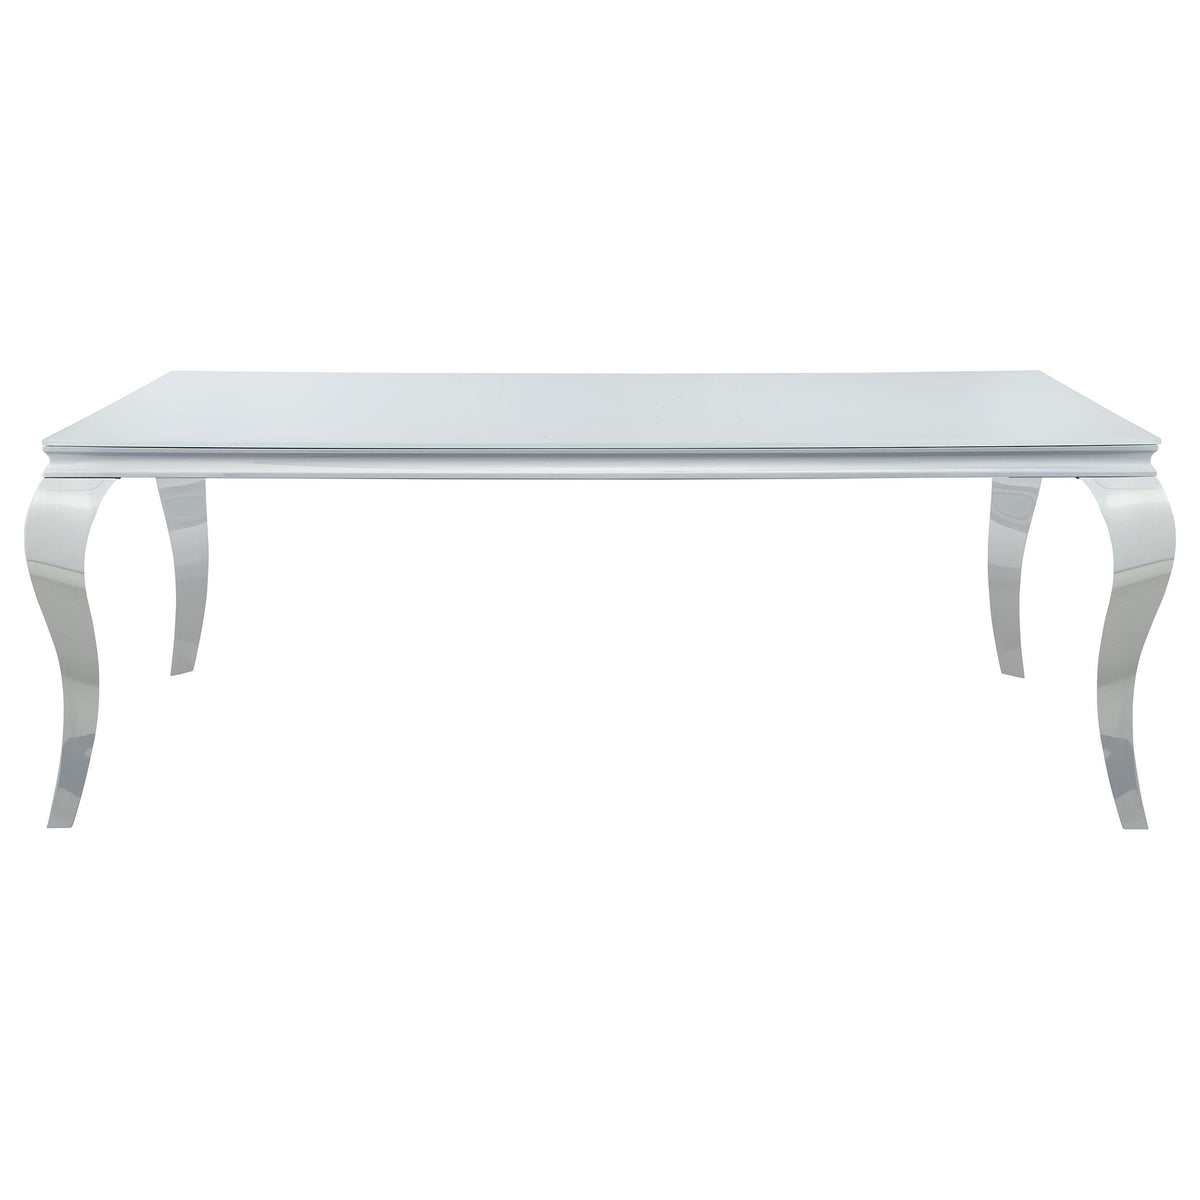 Carone Rectangular Glass Top Dining Table White and Chrome  Las Vegas Furniture Stores